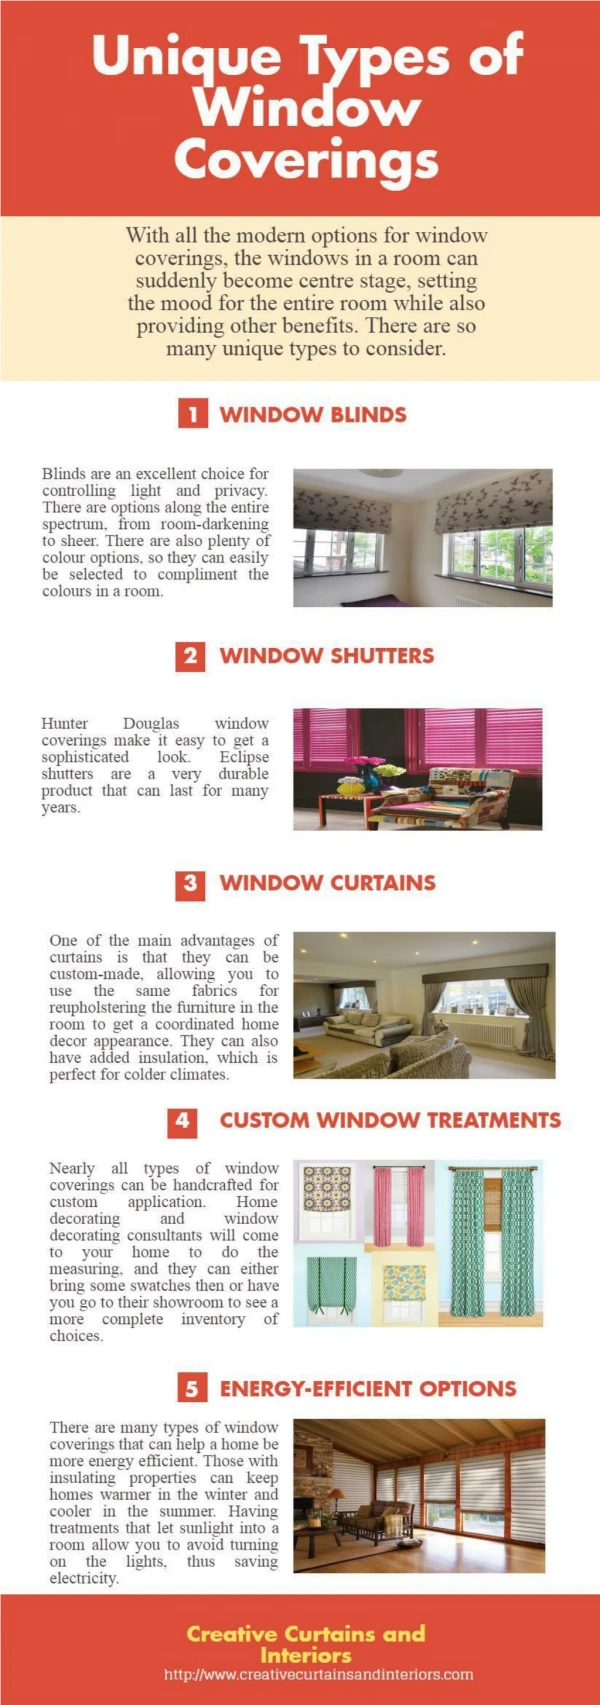 Unique Types of Window Coverings